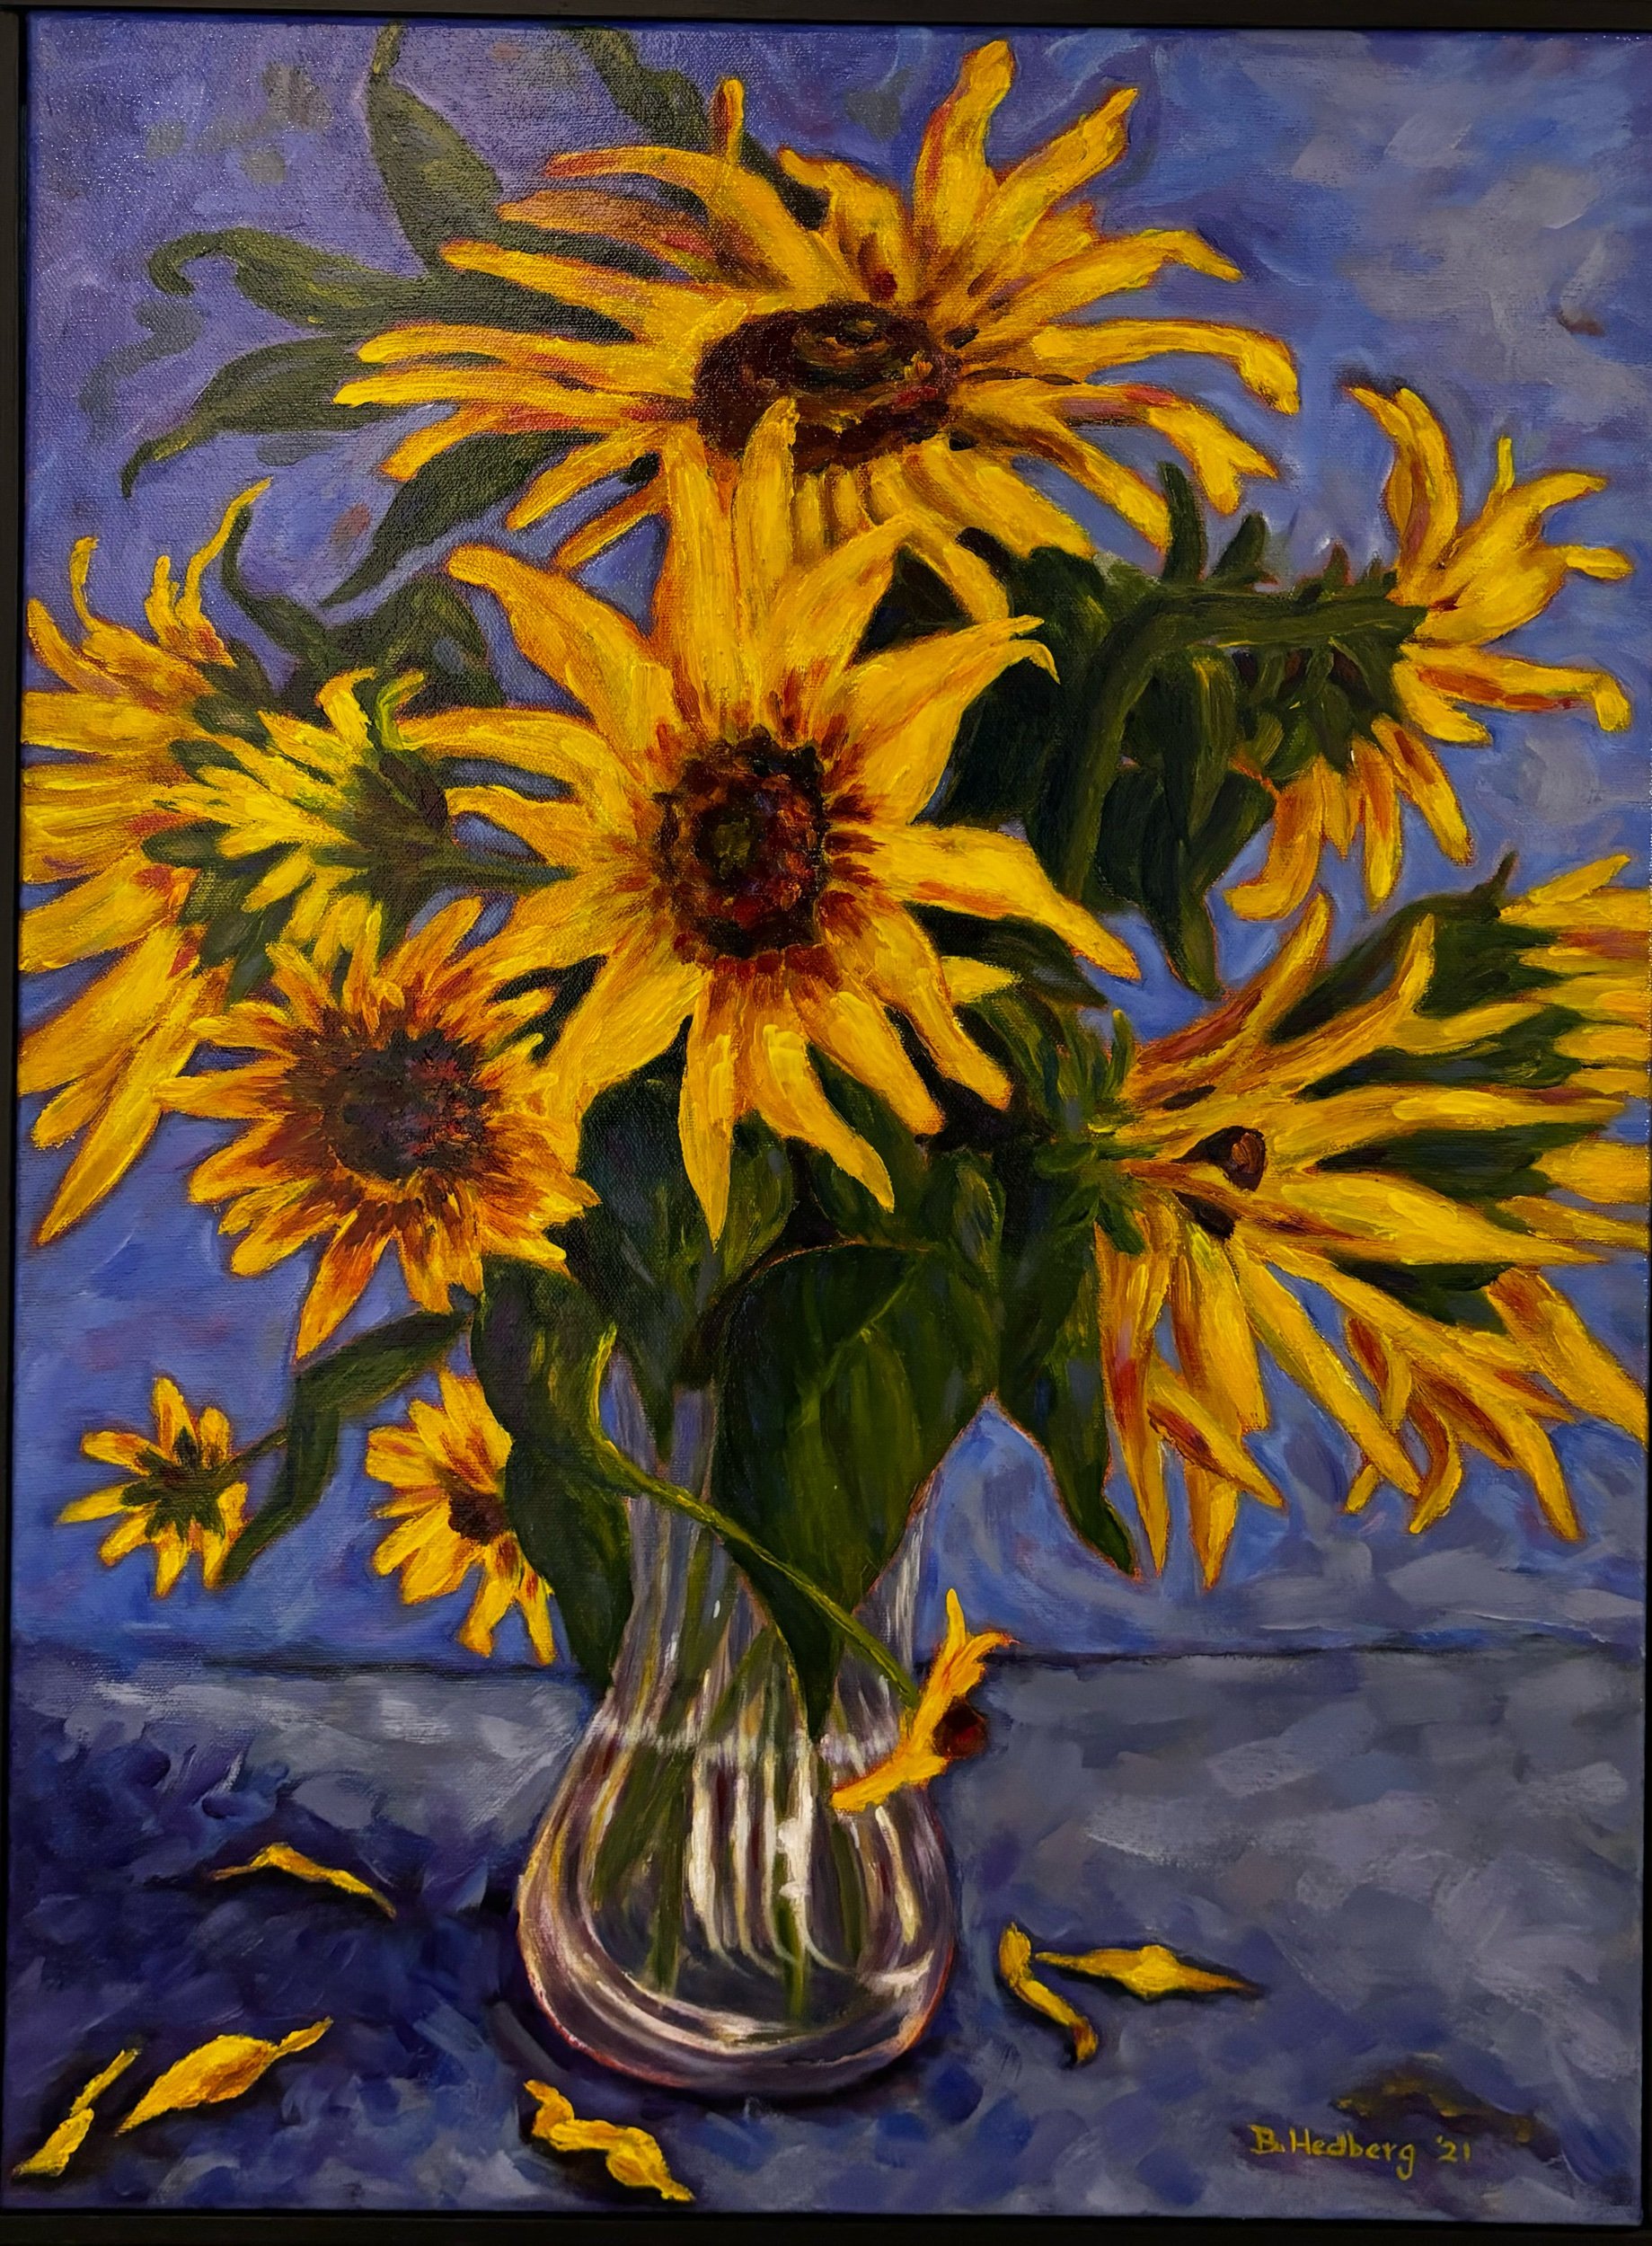 Scurry of Sunflowers